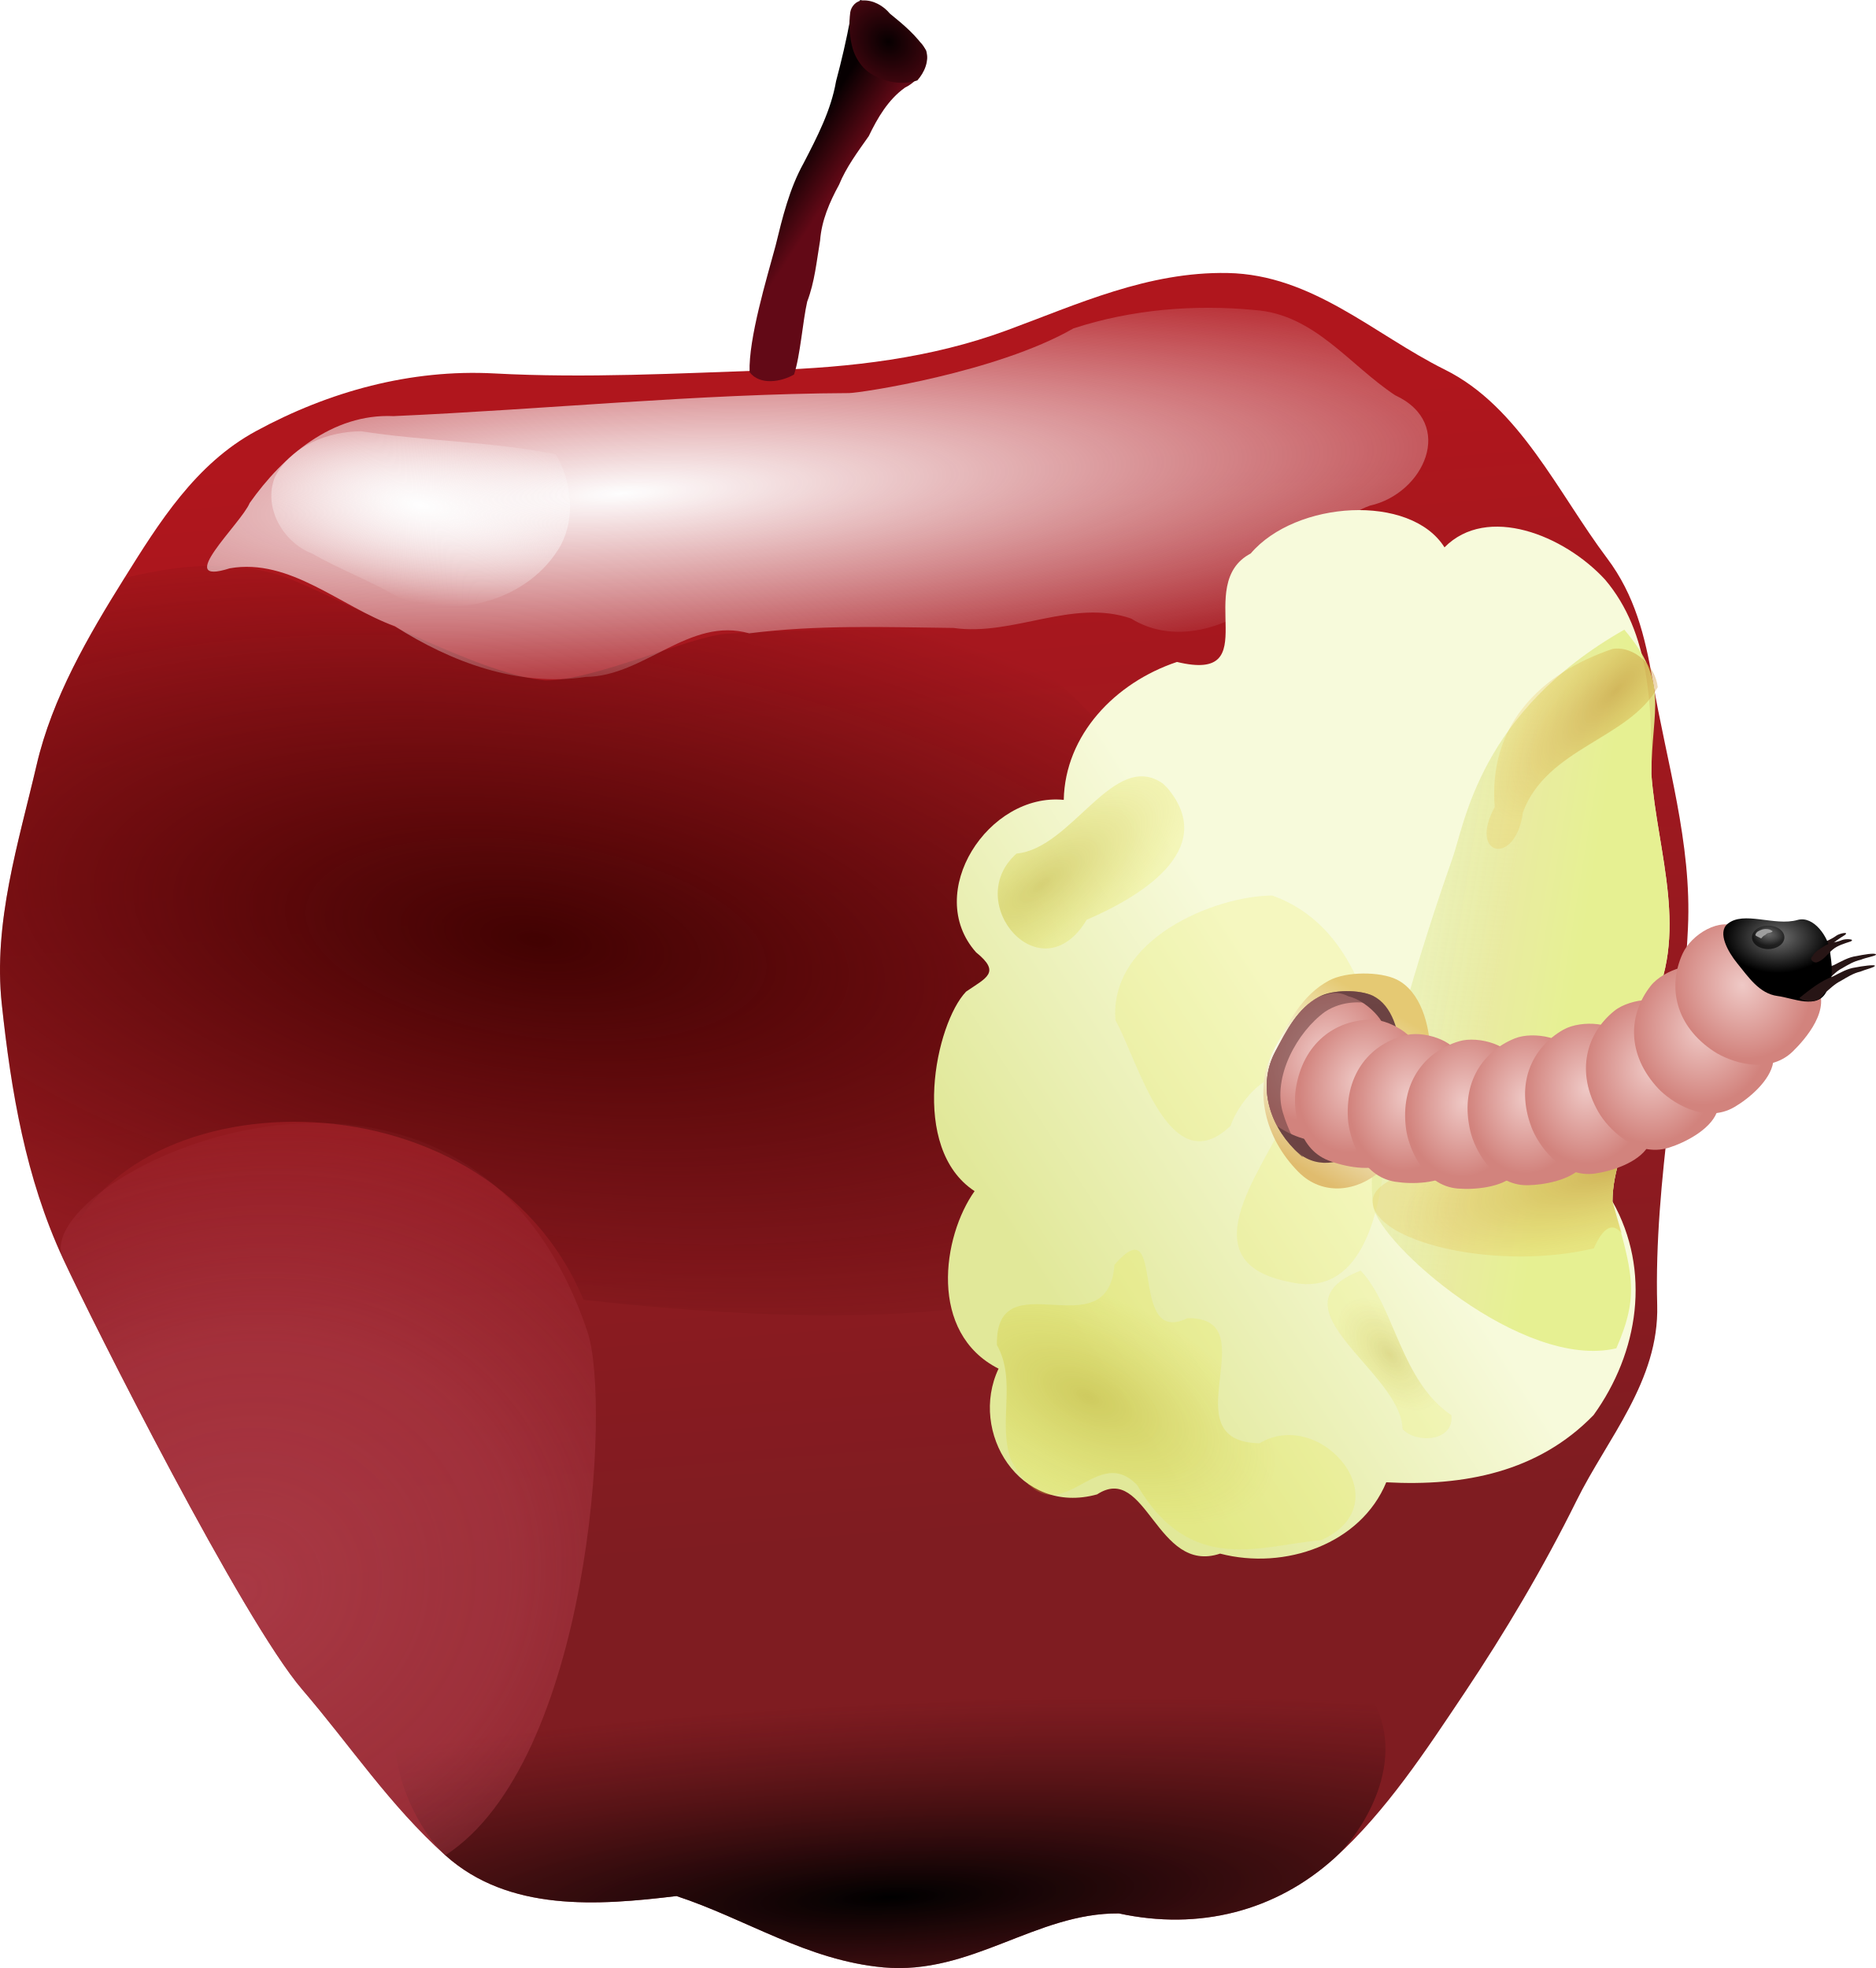 Aj apple bclipart wormbclipart. Worm clipart w be for